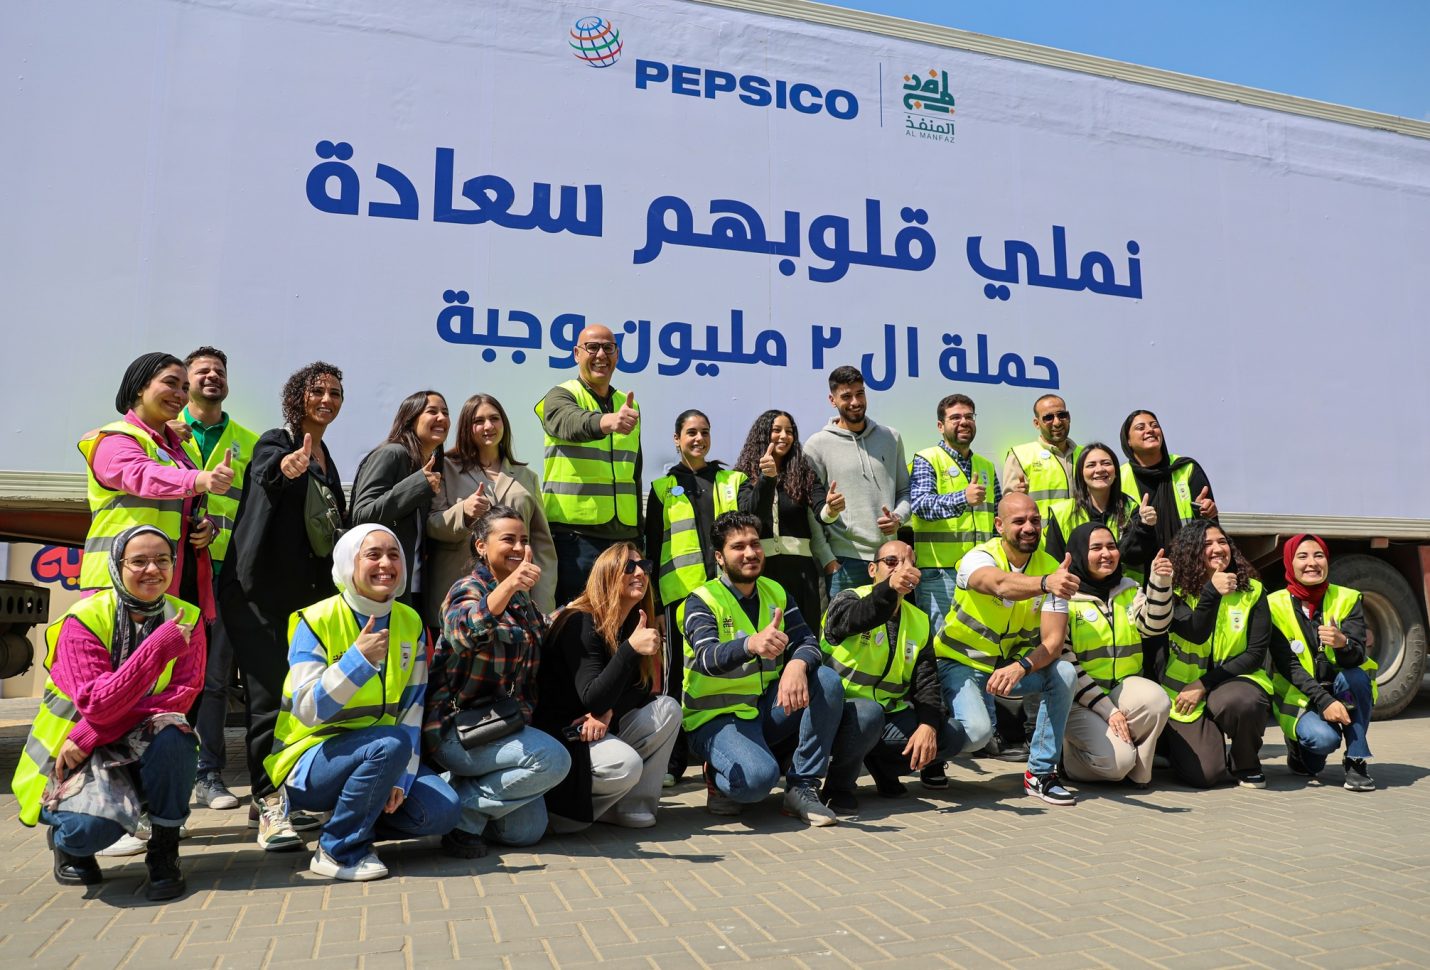 PepsiCo Egypt, Al Manfaz distribute 2 million meals for needy people in 10 governorates in Ramadan